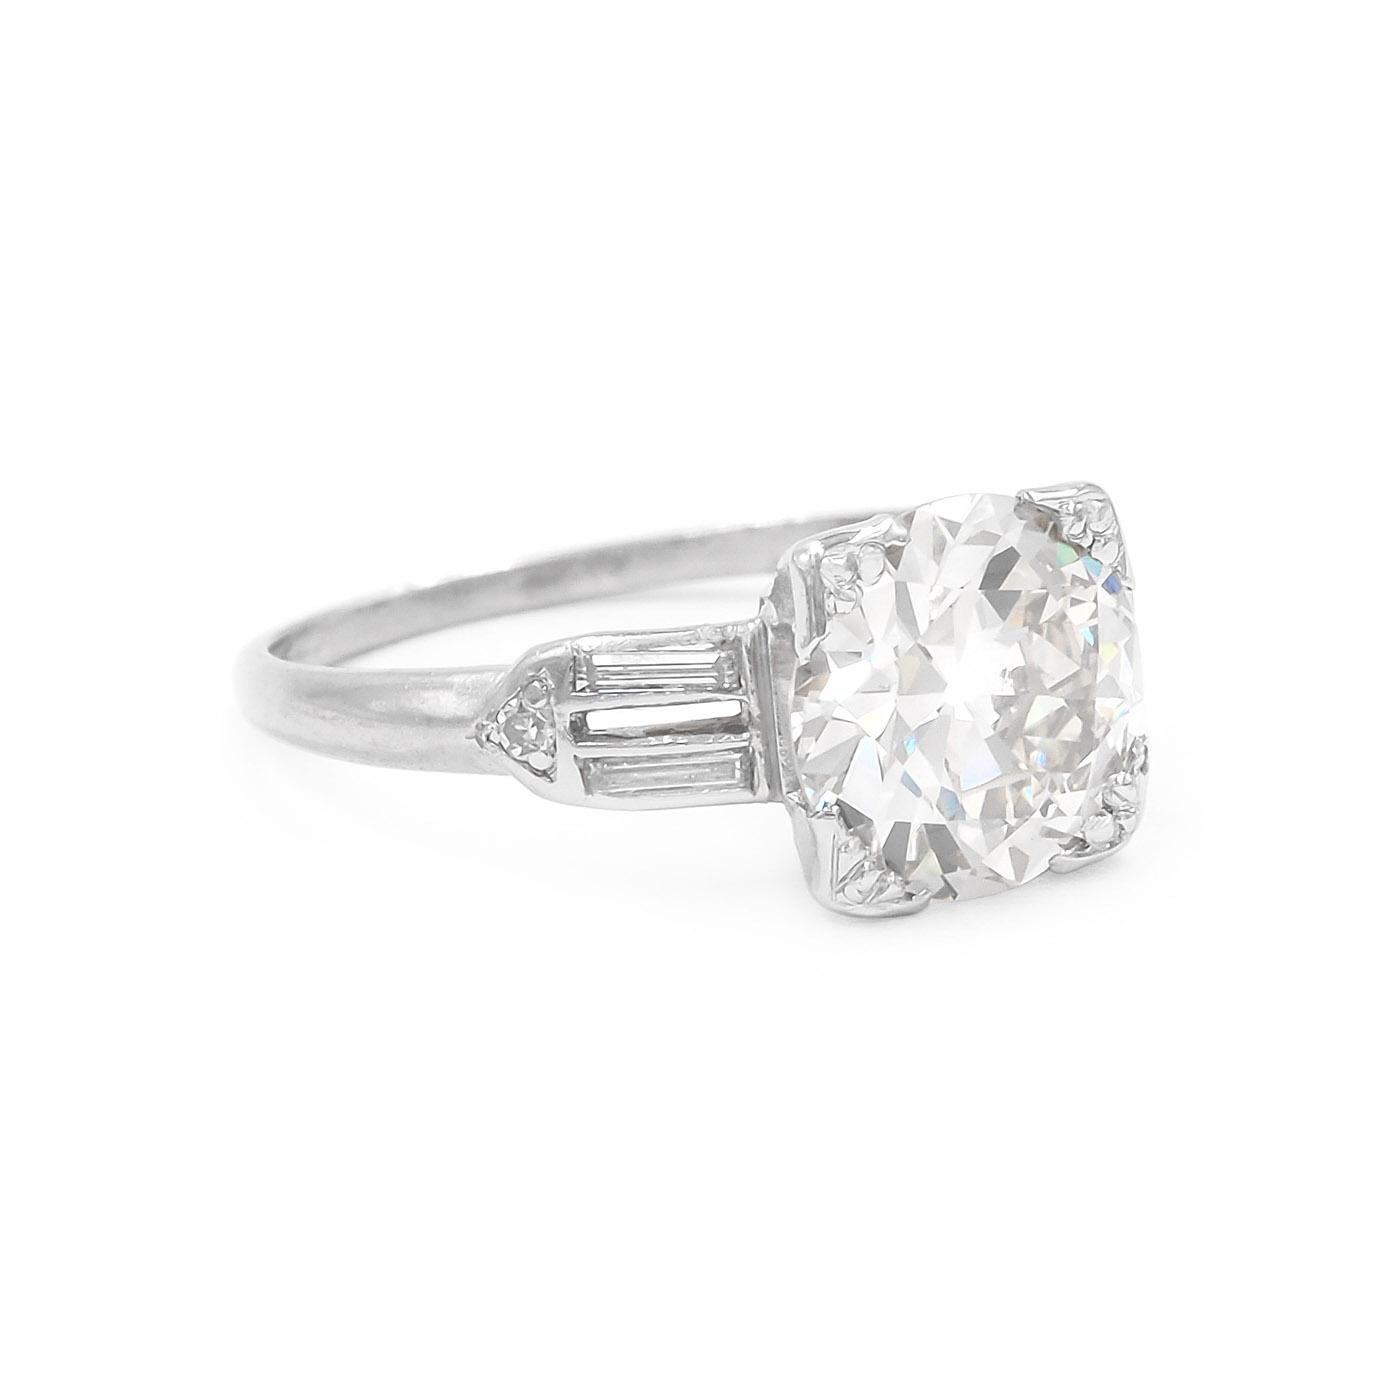 Art Deco era 2.00 Carat Transitional Cut Diamond Engagement Ring composed of platinum. Featuring a 2.00 carat Transitional Cut diamond (an early Round Brilliant Cut), GIA certified L color & VS2 clarity. Set with an additional 4 Straight Baguette